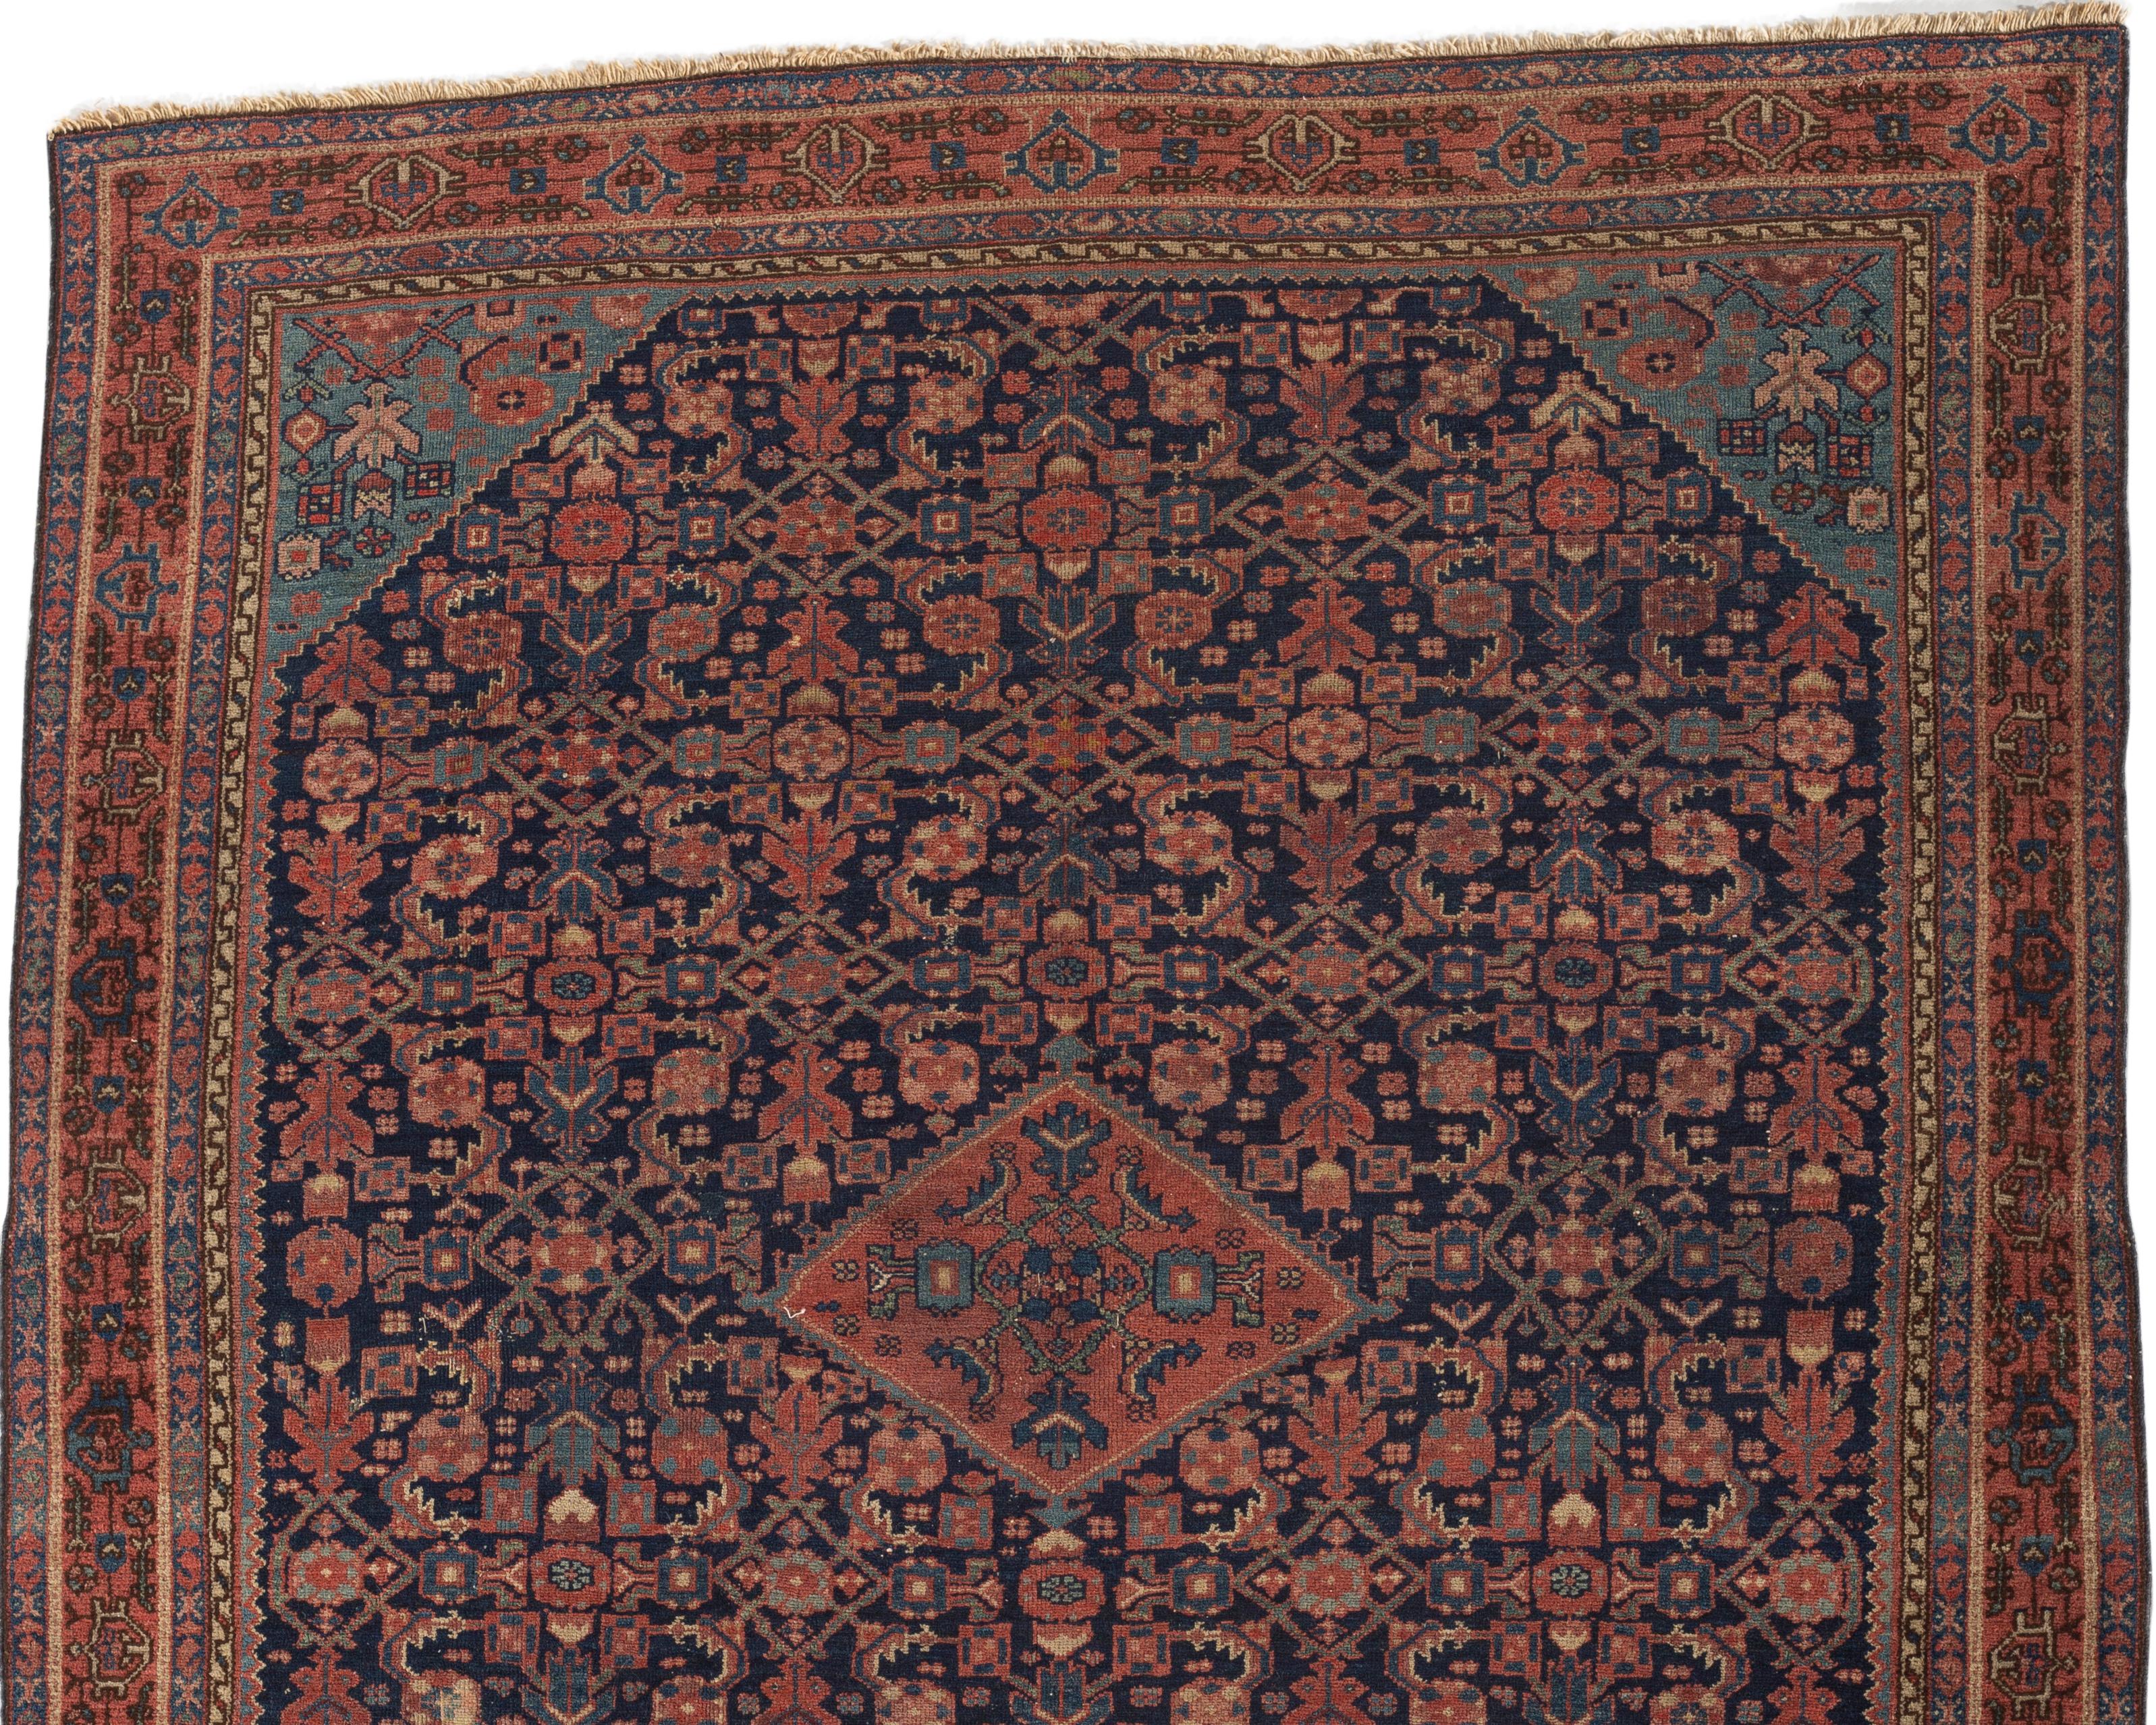 Antique Persian Malayer rug, circa 1900. Antique rugs from Malayer, east of Hamadan, could be considered top quality Hamadan’s and they share similar structural aspects. This lovely small scatter rug has a deep navy field filled with an array of